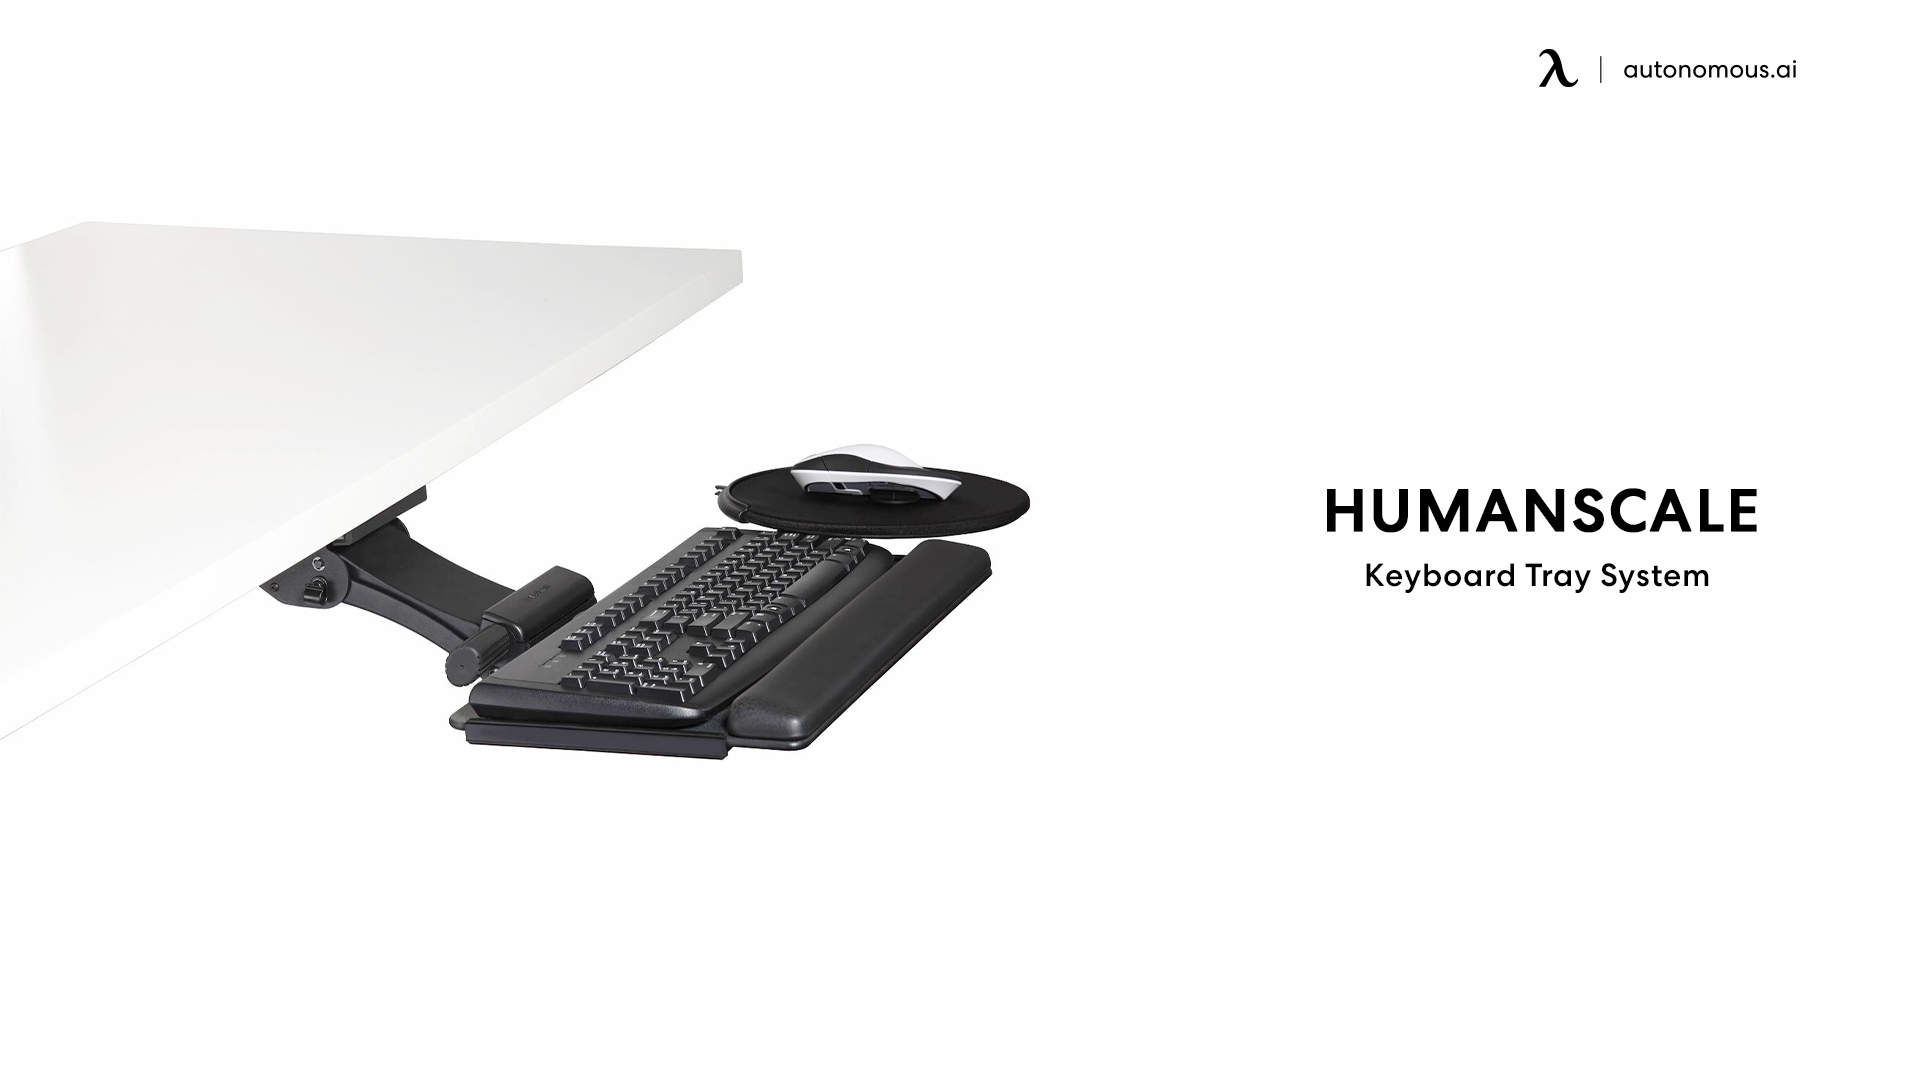 Humanscale Keyboard Tray System